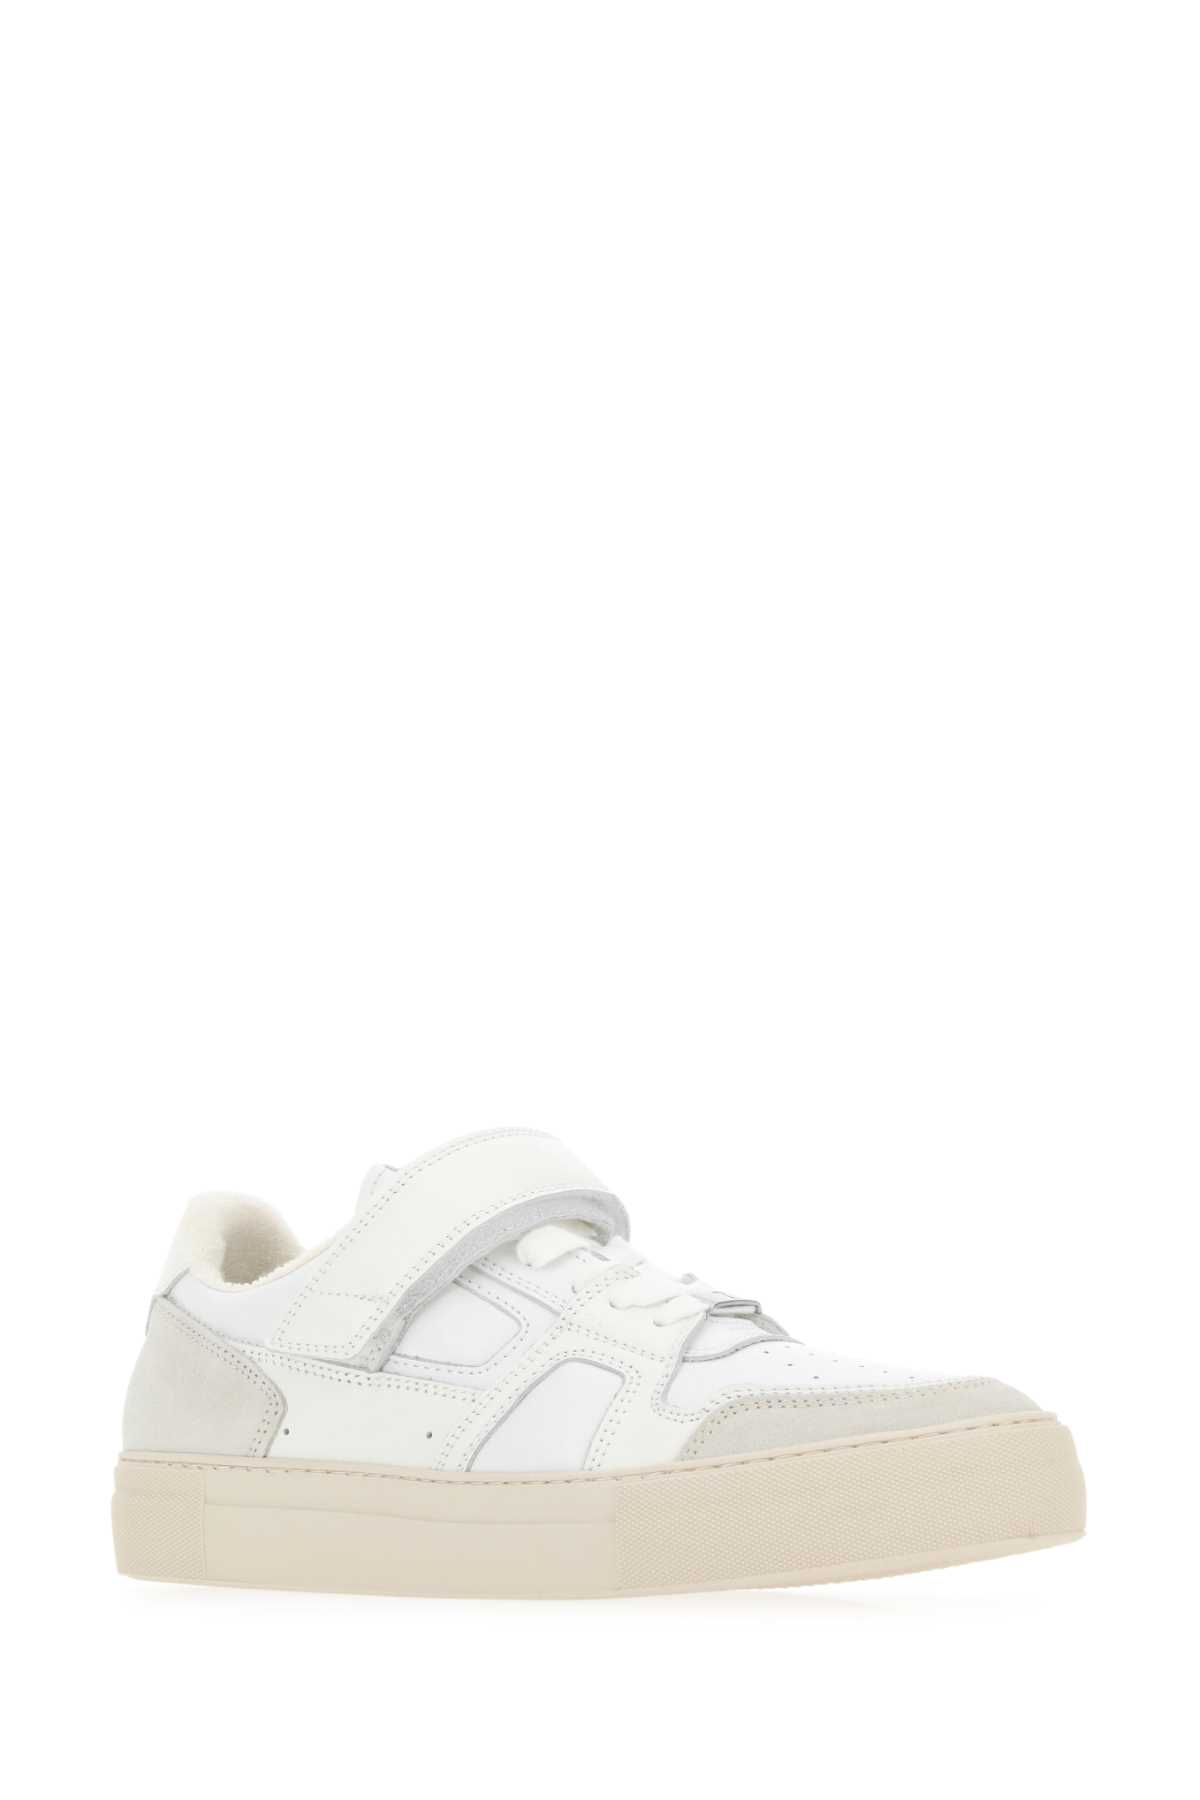 Ami Alexandre Mattiussi Two-tone Leather And Suede Ami Arcade Sneakers In 107